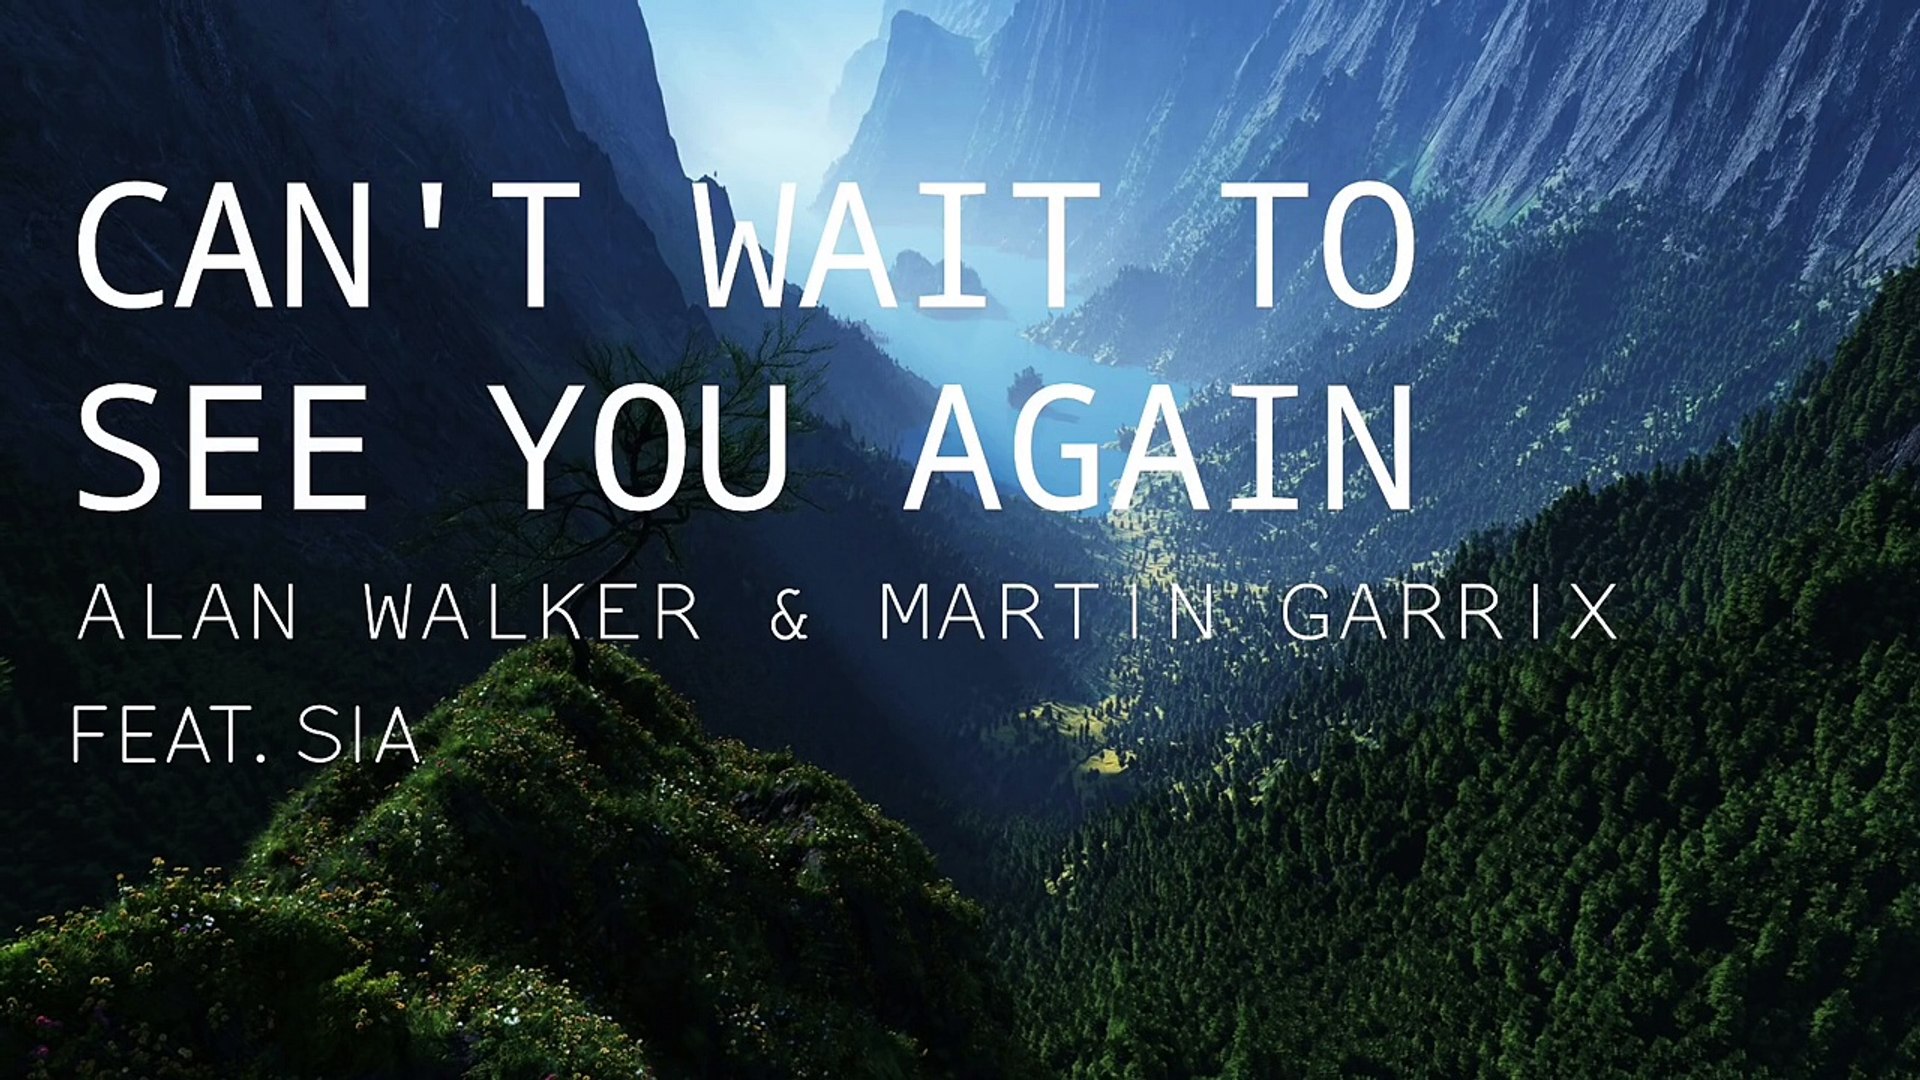 Alan Walker & Martin Garrix ft. Sia - Can't Wait To See You Again (New Song  2016) - video Dailymotion